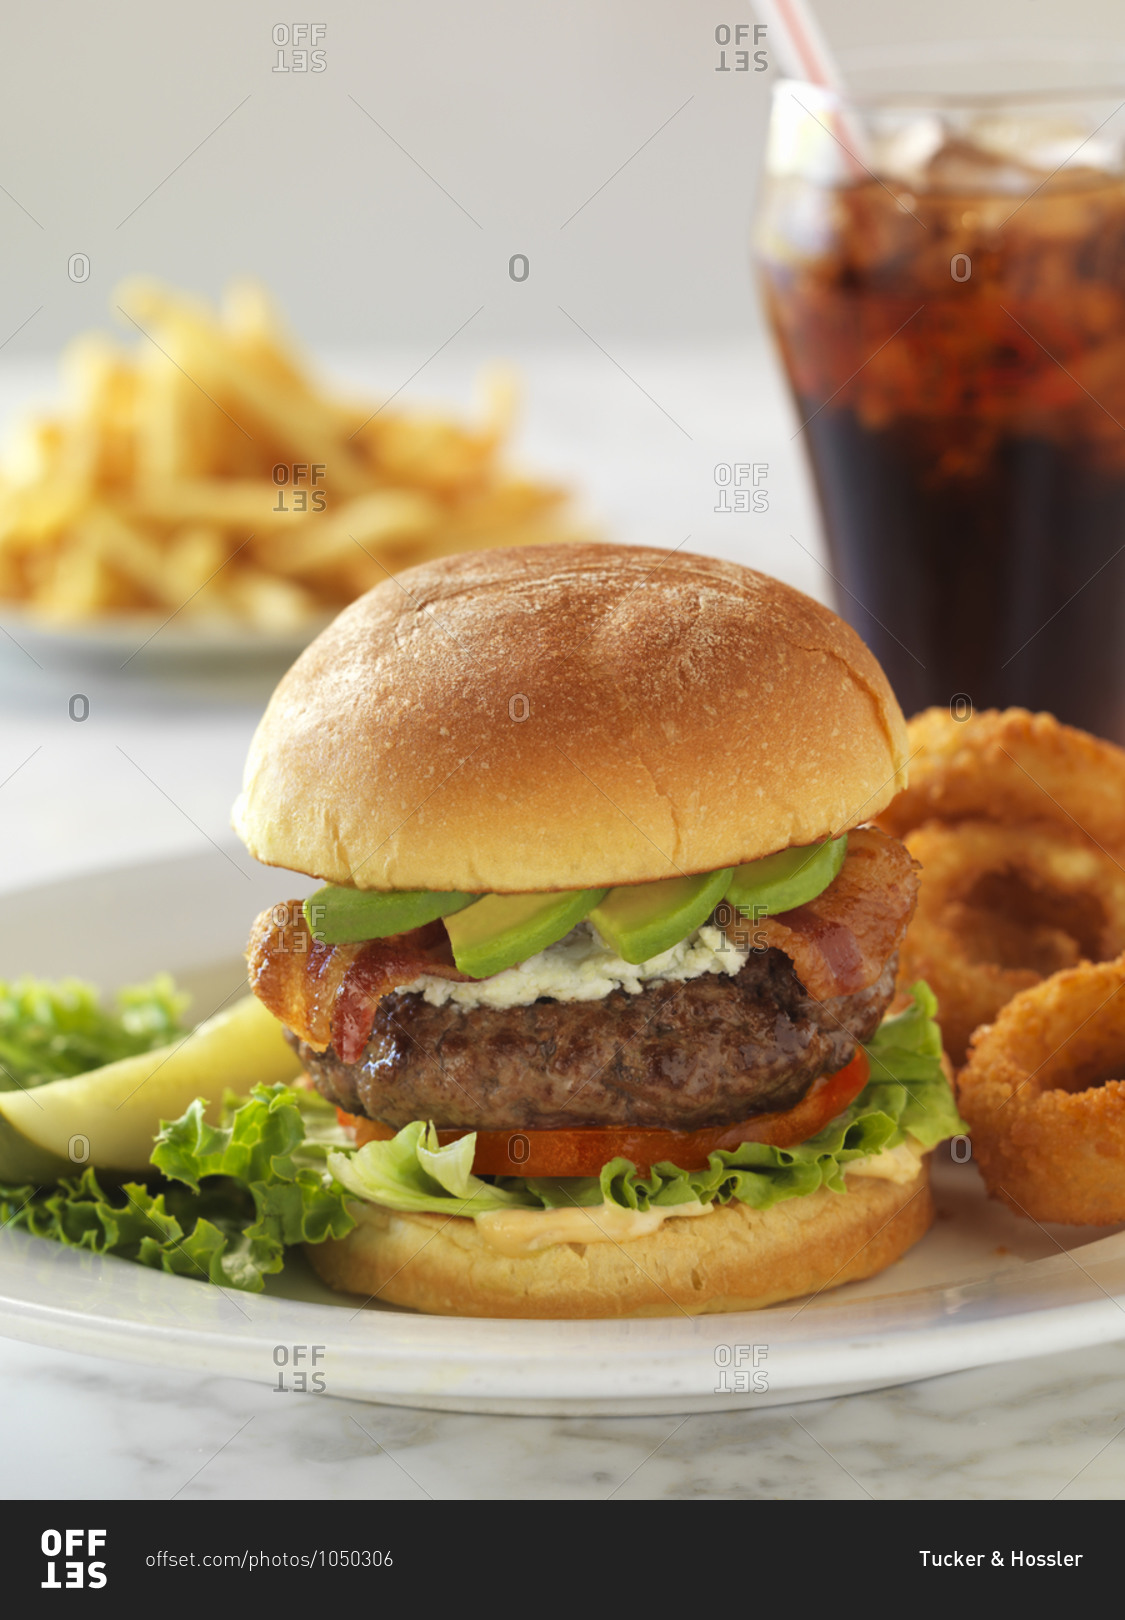 A hearty meal of a blue cheese burger with bacon a pickle, onion rings and soda.